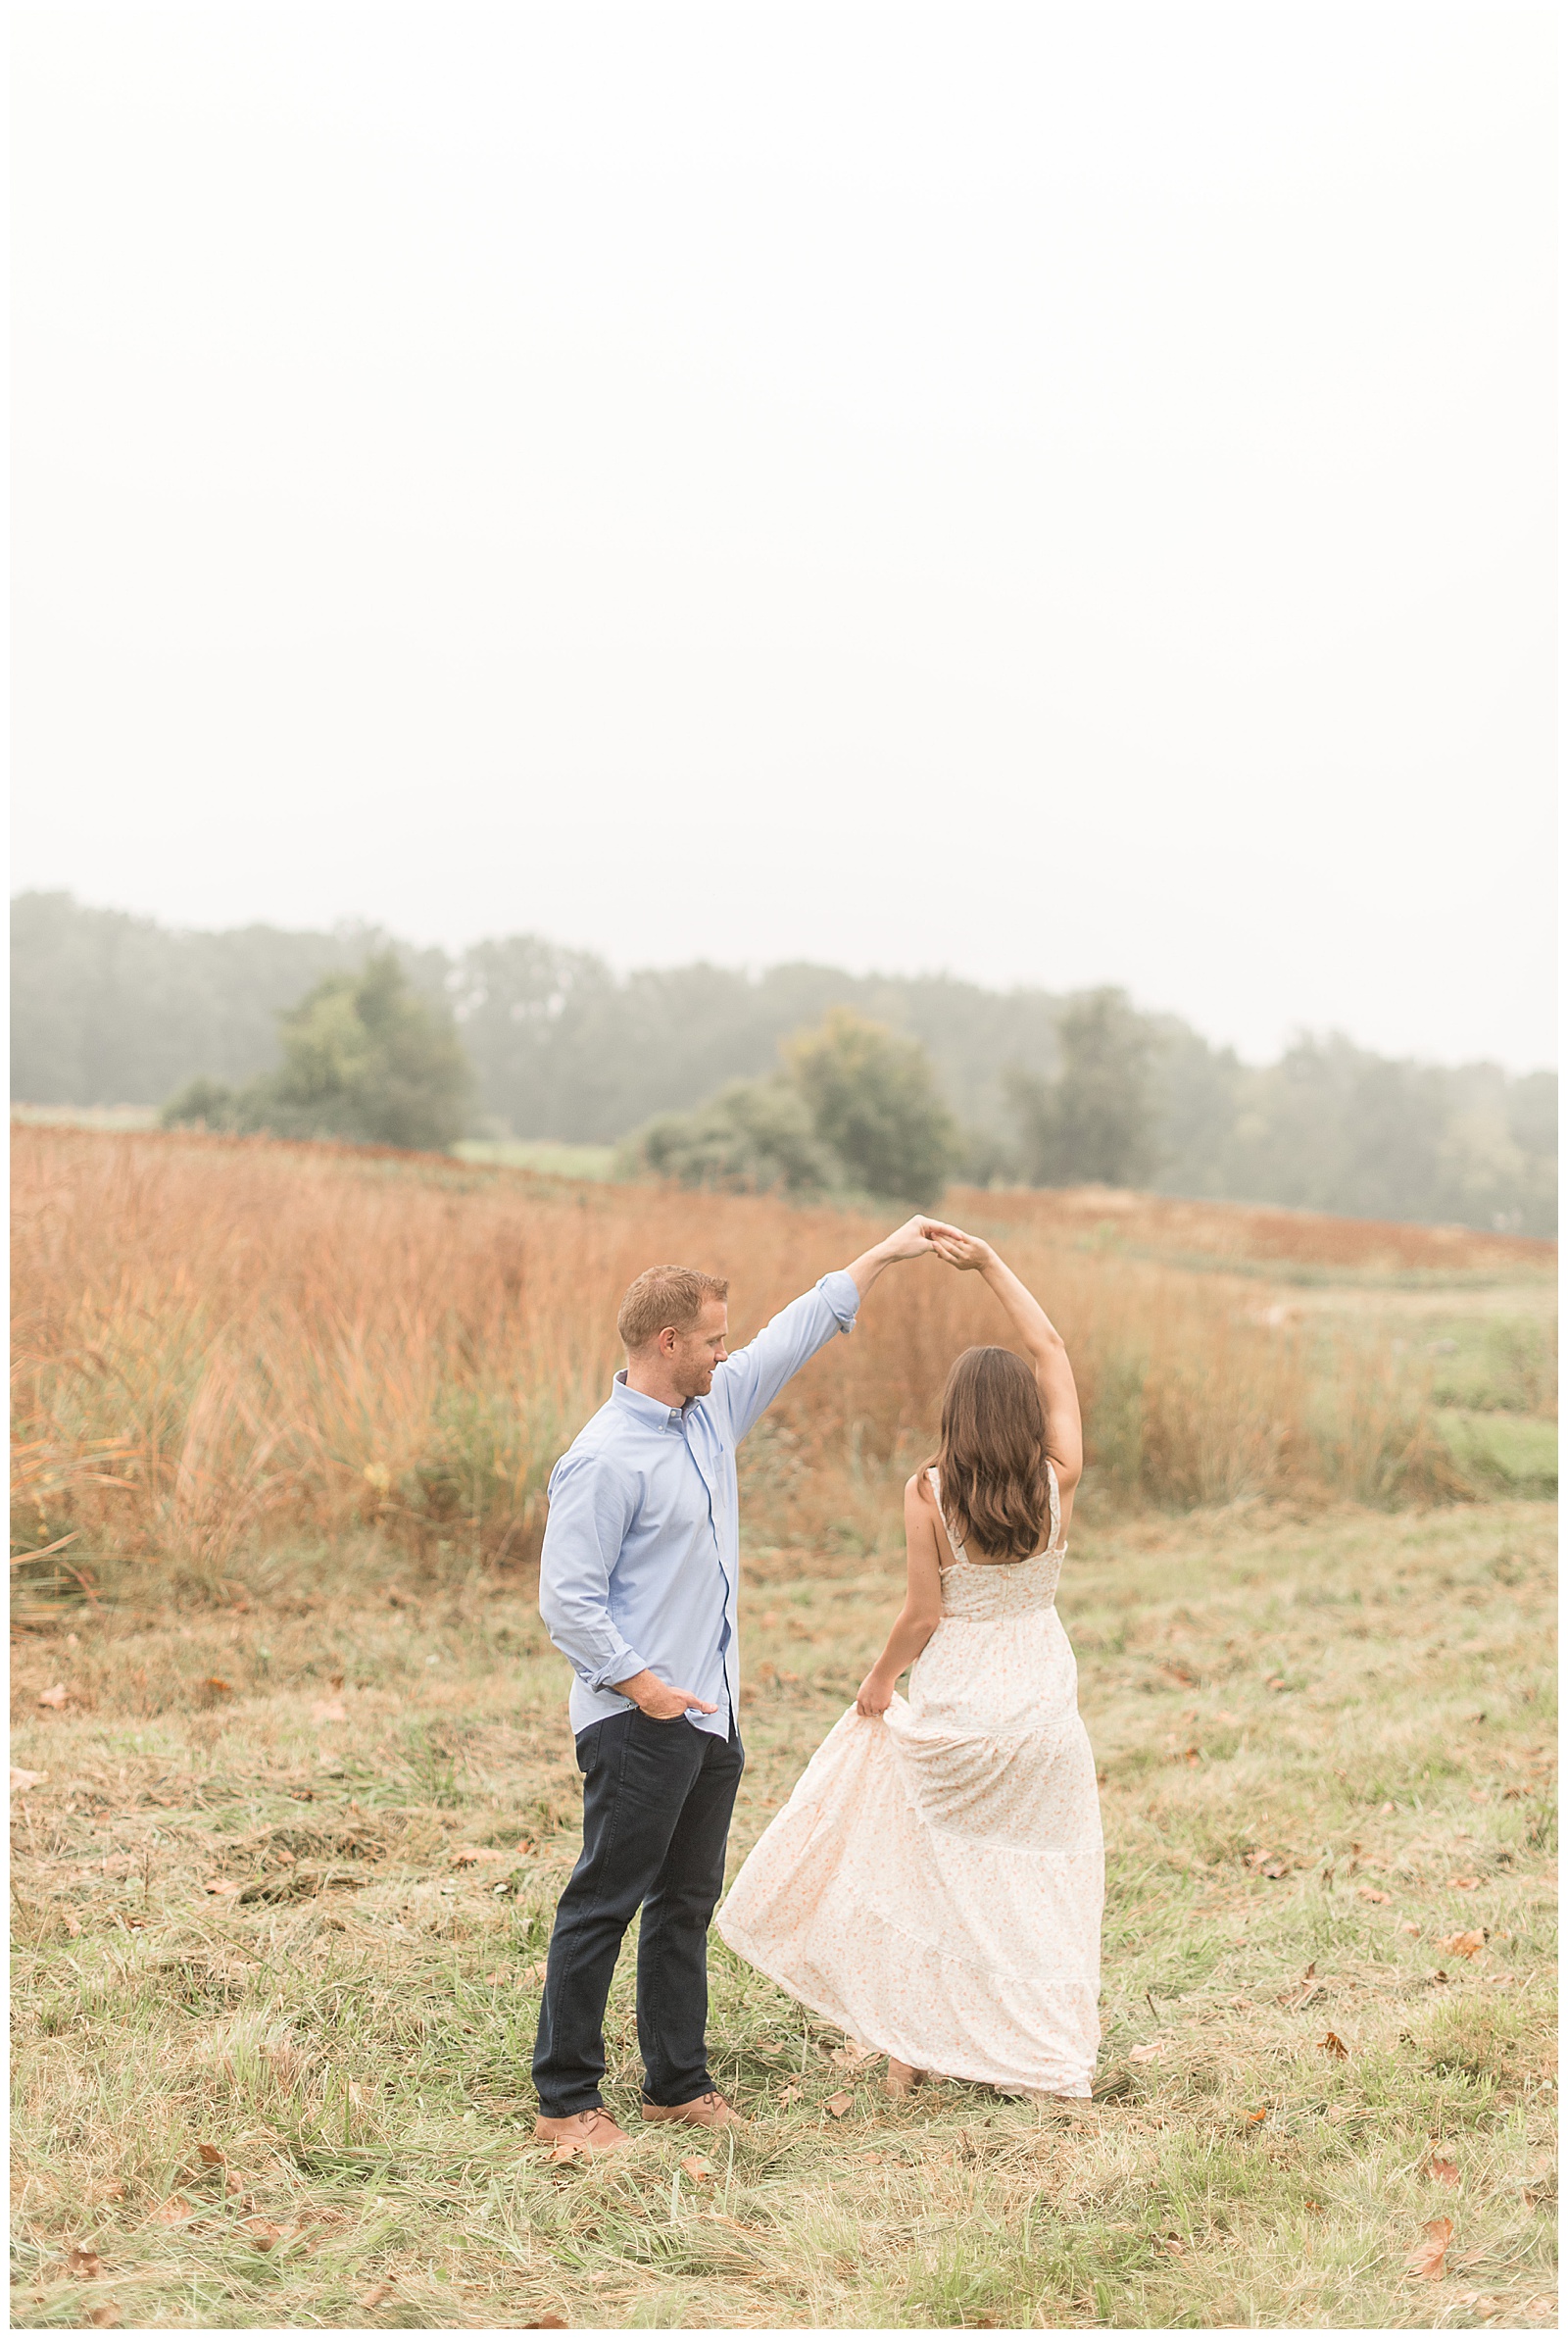 guy twirling girl under left arm in hay field with tall grasses behind them in chester county pennsylvania